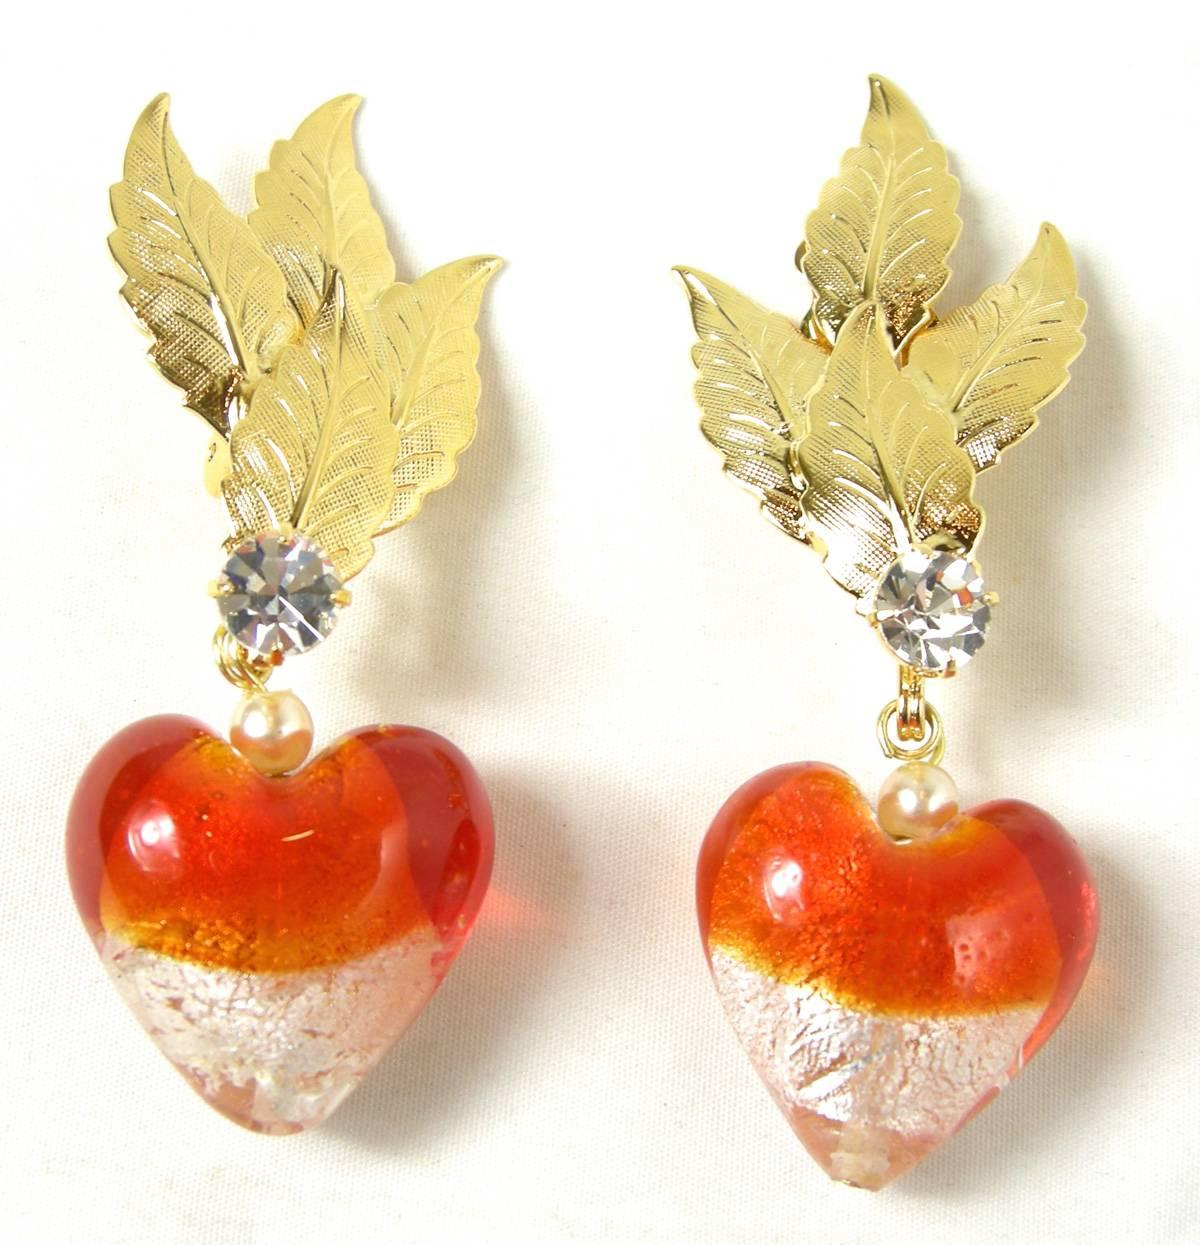 These wonderful heart shaped clip earrings by Robert Sorrell are perfect for Valentine’s Day or any day.  There are three gold leaves on top suspending downward to orange and clear hand blown glass hearts. Each heart is slightly different since each